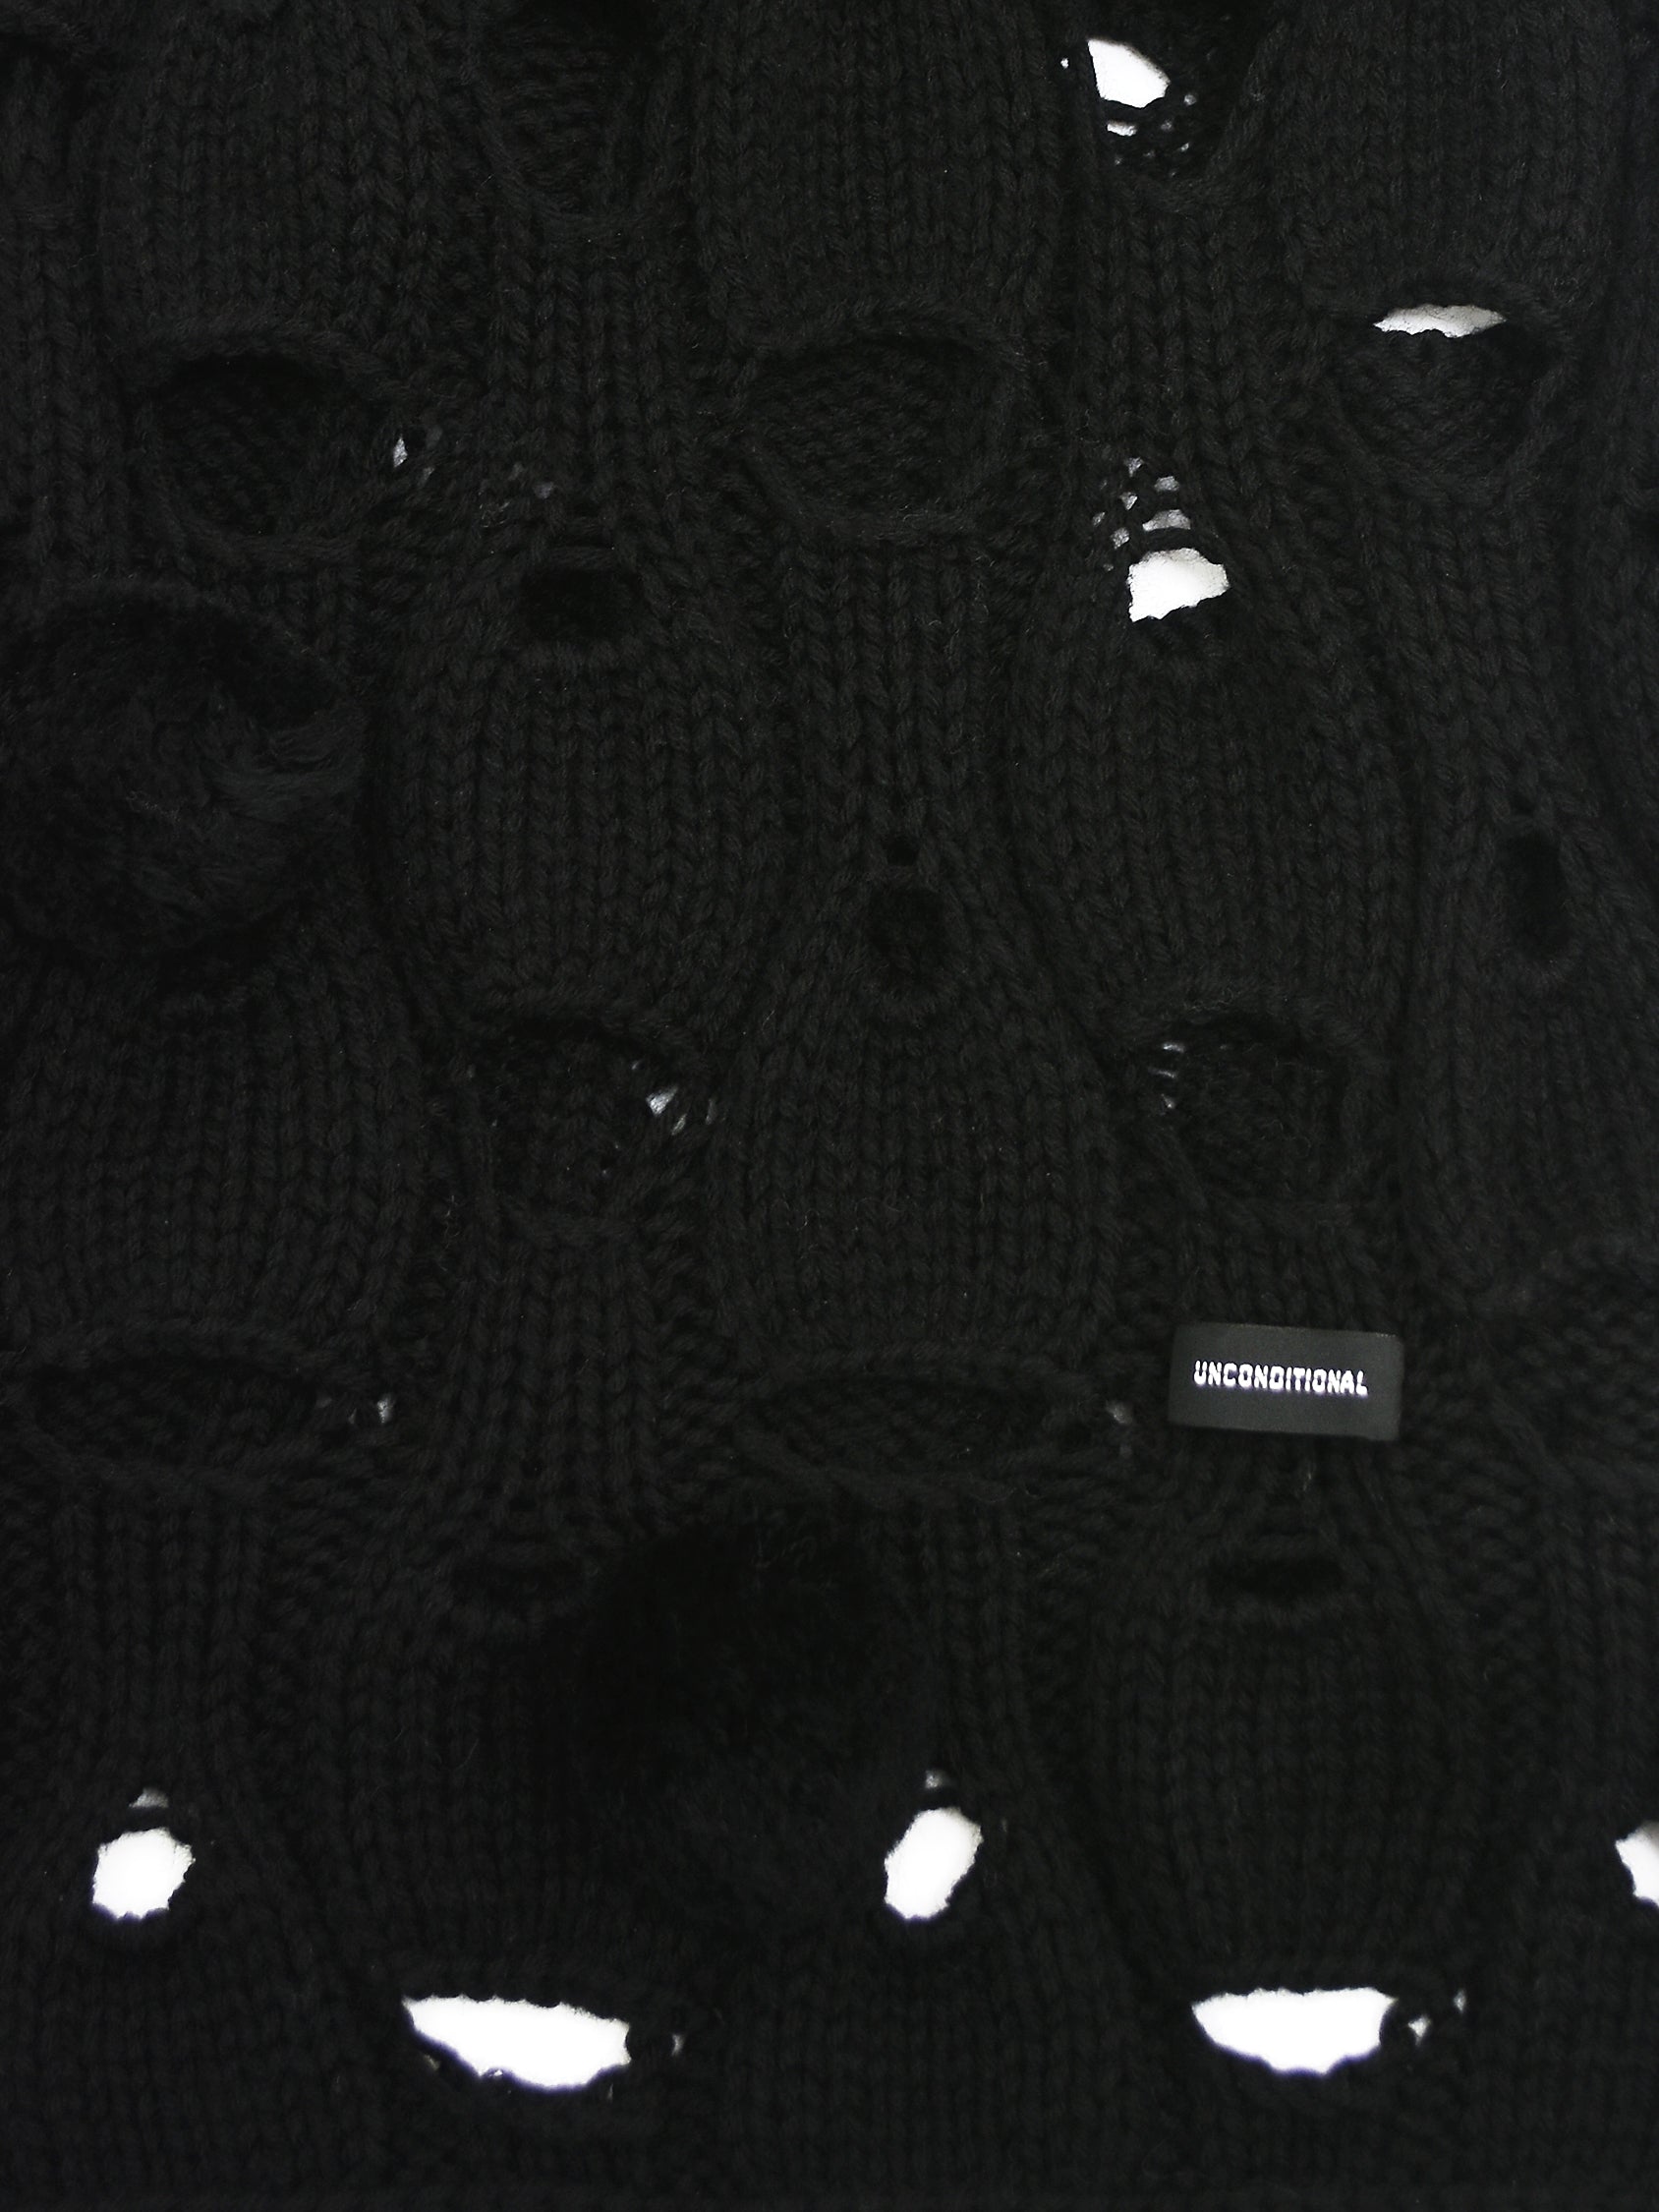 HOLEY KNIT SCARF IN BLACK